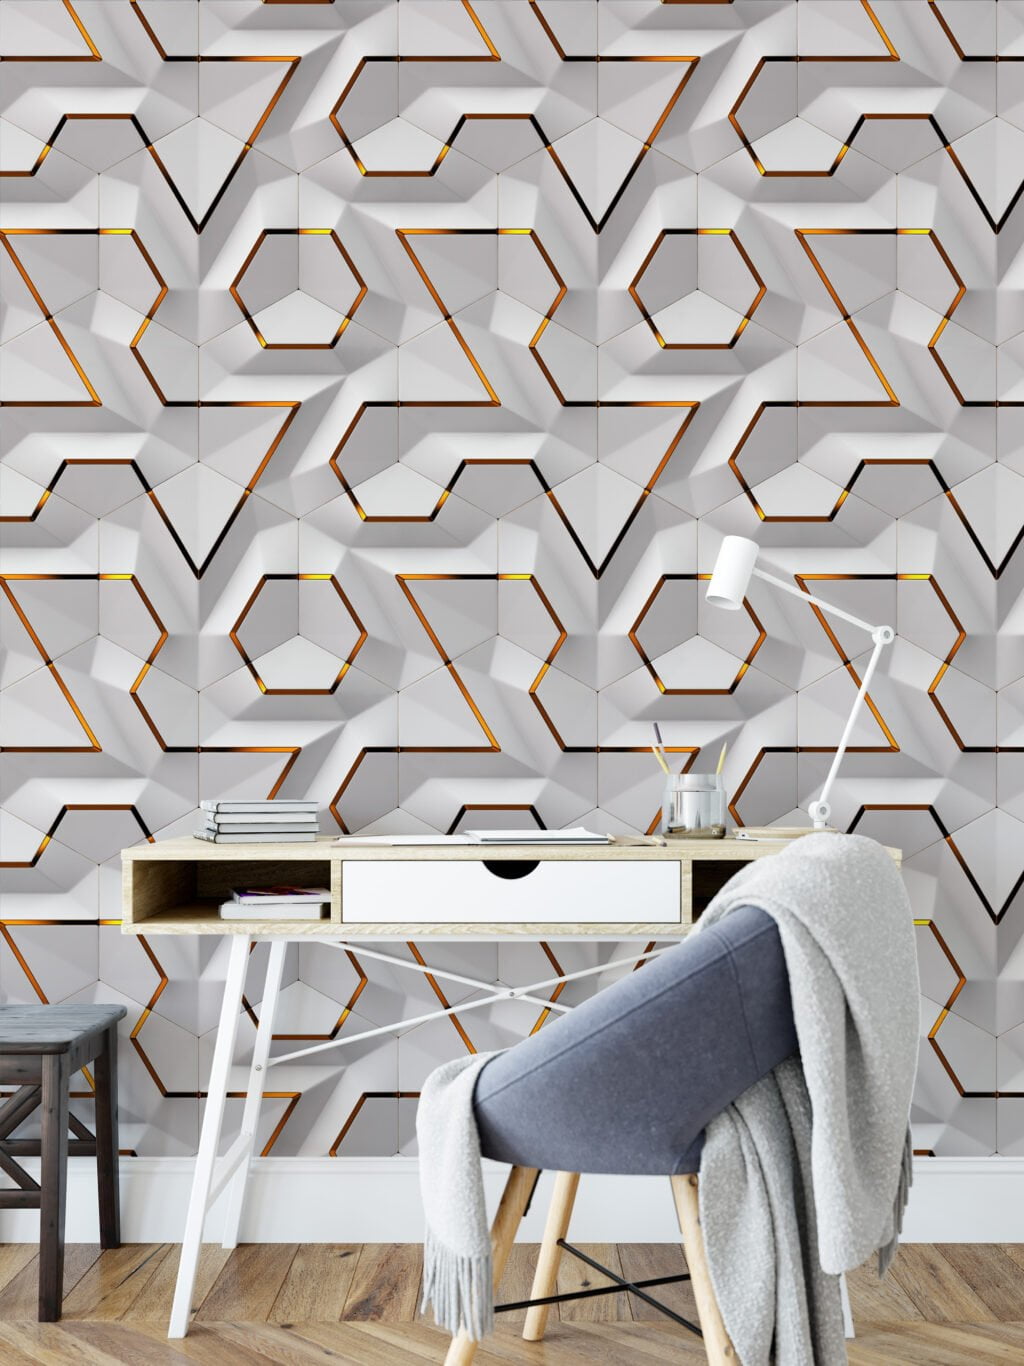 Peel and Stick White Geometric Modules Wallpaper, Self-Adhesive Removable Wall Mural, Modern Wall Decoration for Living Rooms or Bedrooms